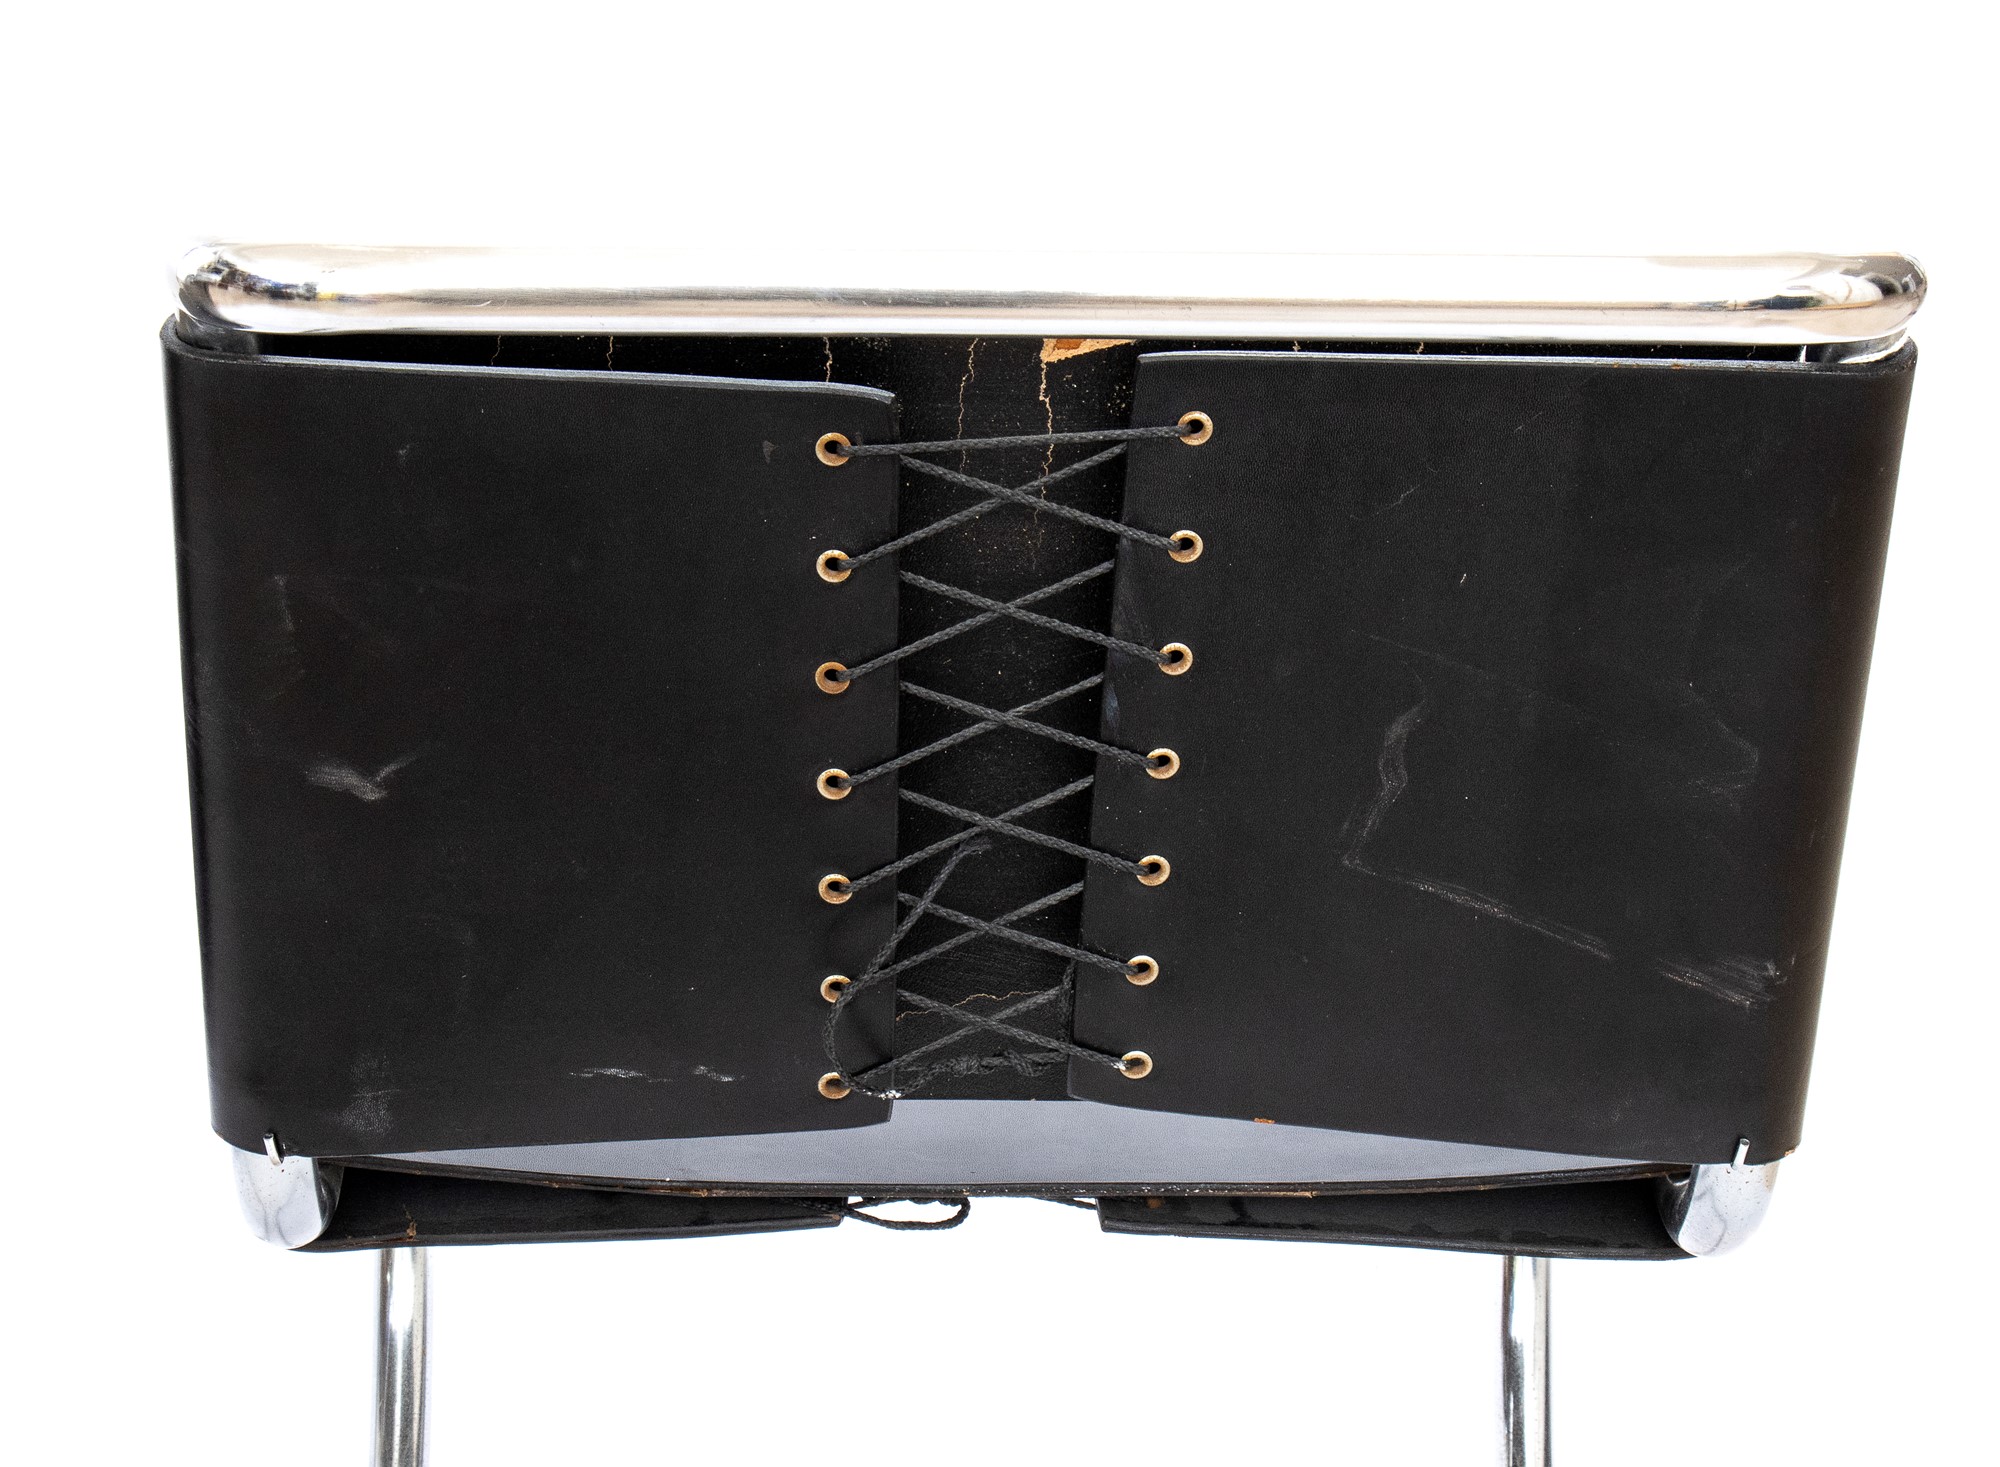 2 chairs in black leather and steel designed by Mart Stam and Marcer Beuer - Image 16 of 19